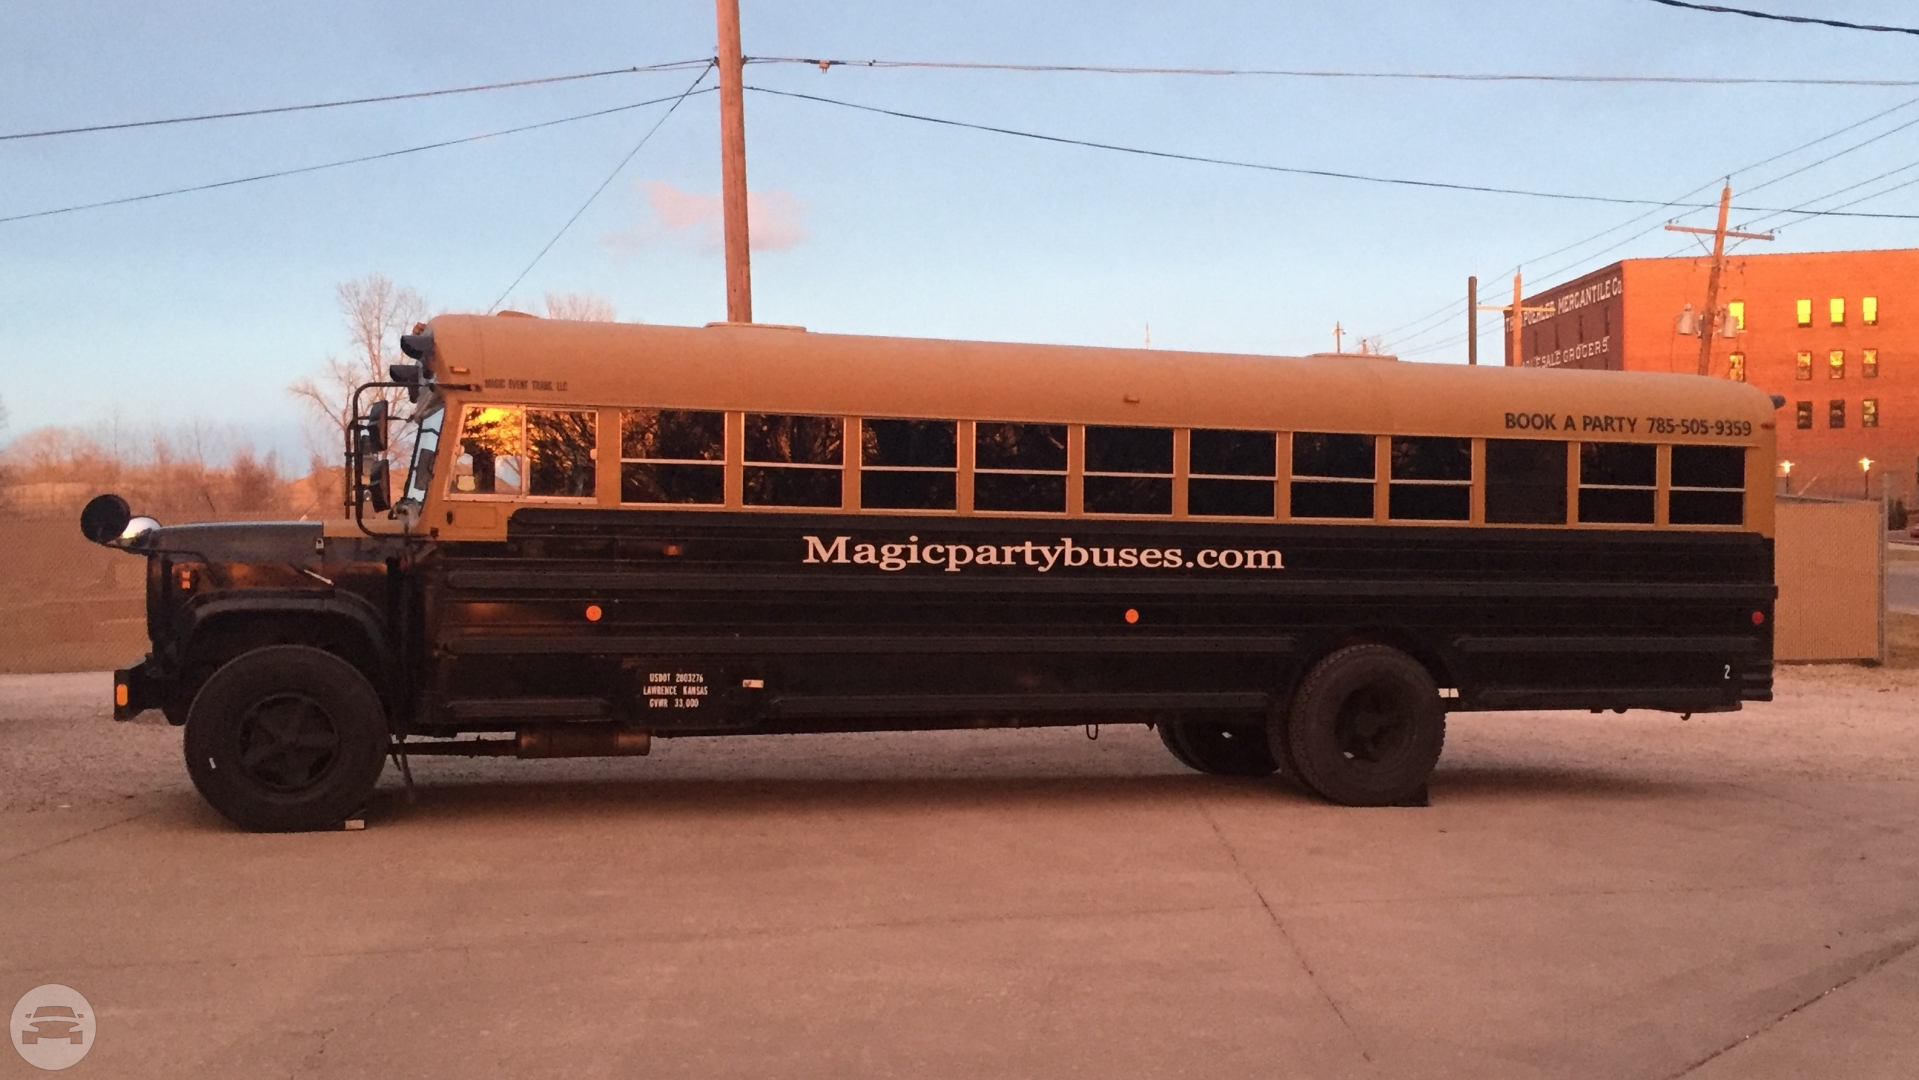 Magic Party Bus
Party Limo Bus /
Manhattan, KS

 / Hourly $0.00
